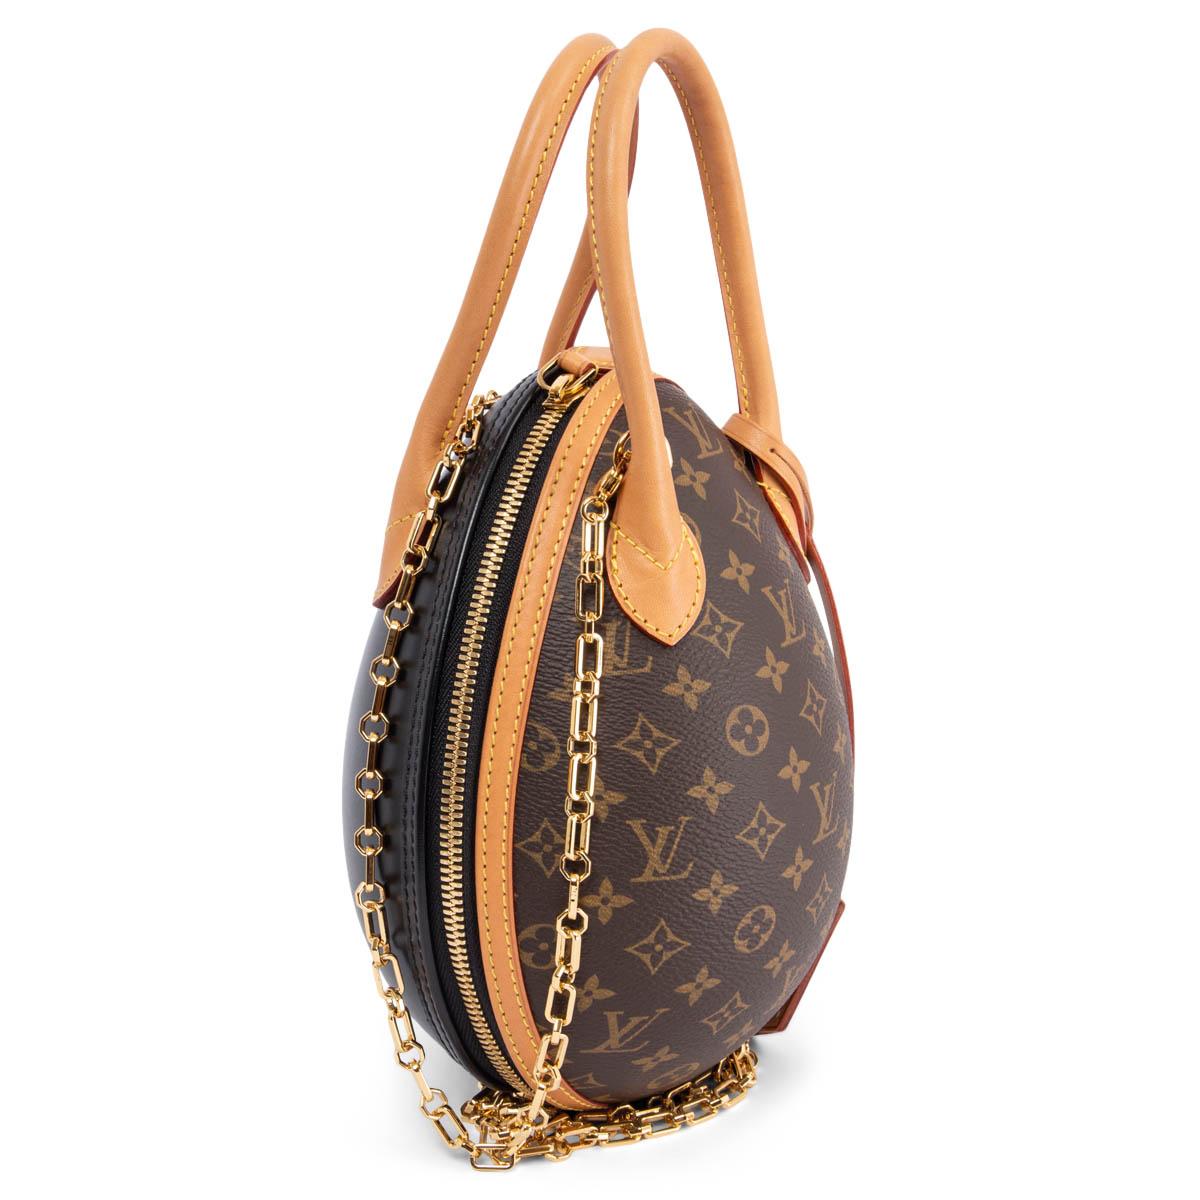 100% authentic Louis Vuitton Egg shoulder bag in Ebene brown Mongoram canvas with natural Vachetta leather trims. Detachable chain crossbody/shoulder strap. Closes with a two-way zipper on top. Lined in black leather. Has been carried and is in